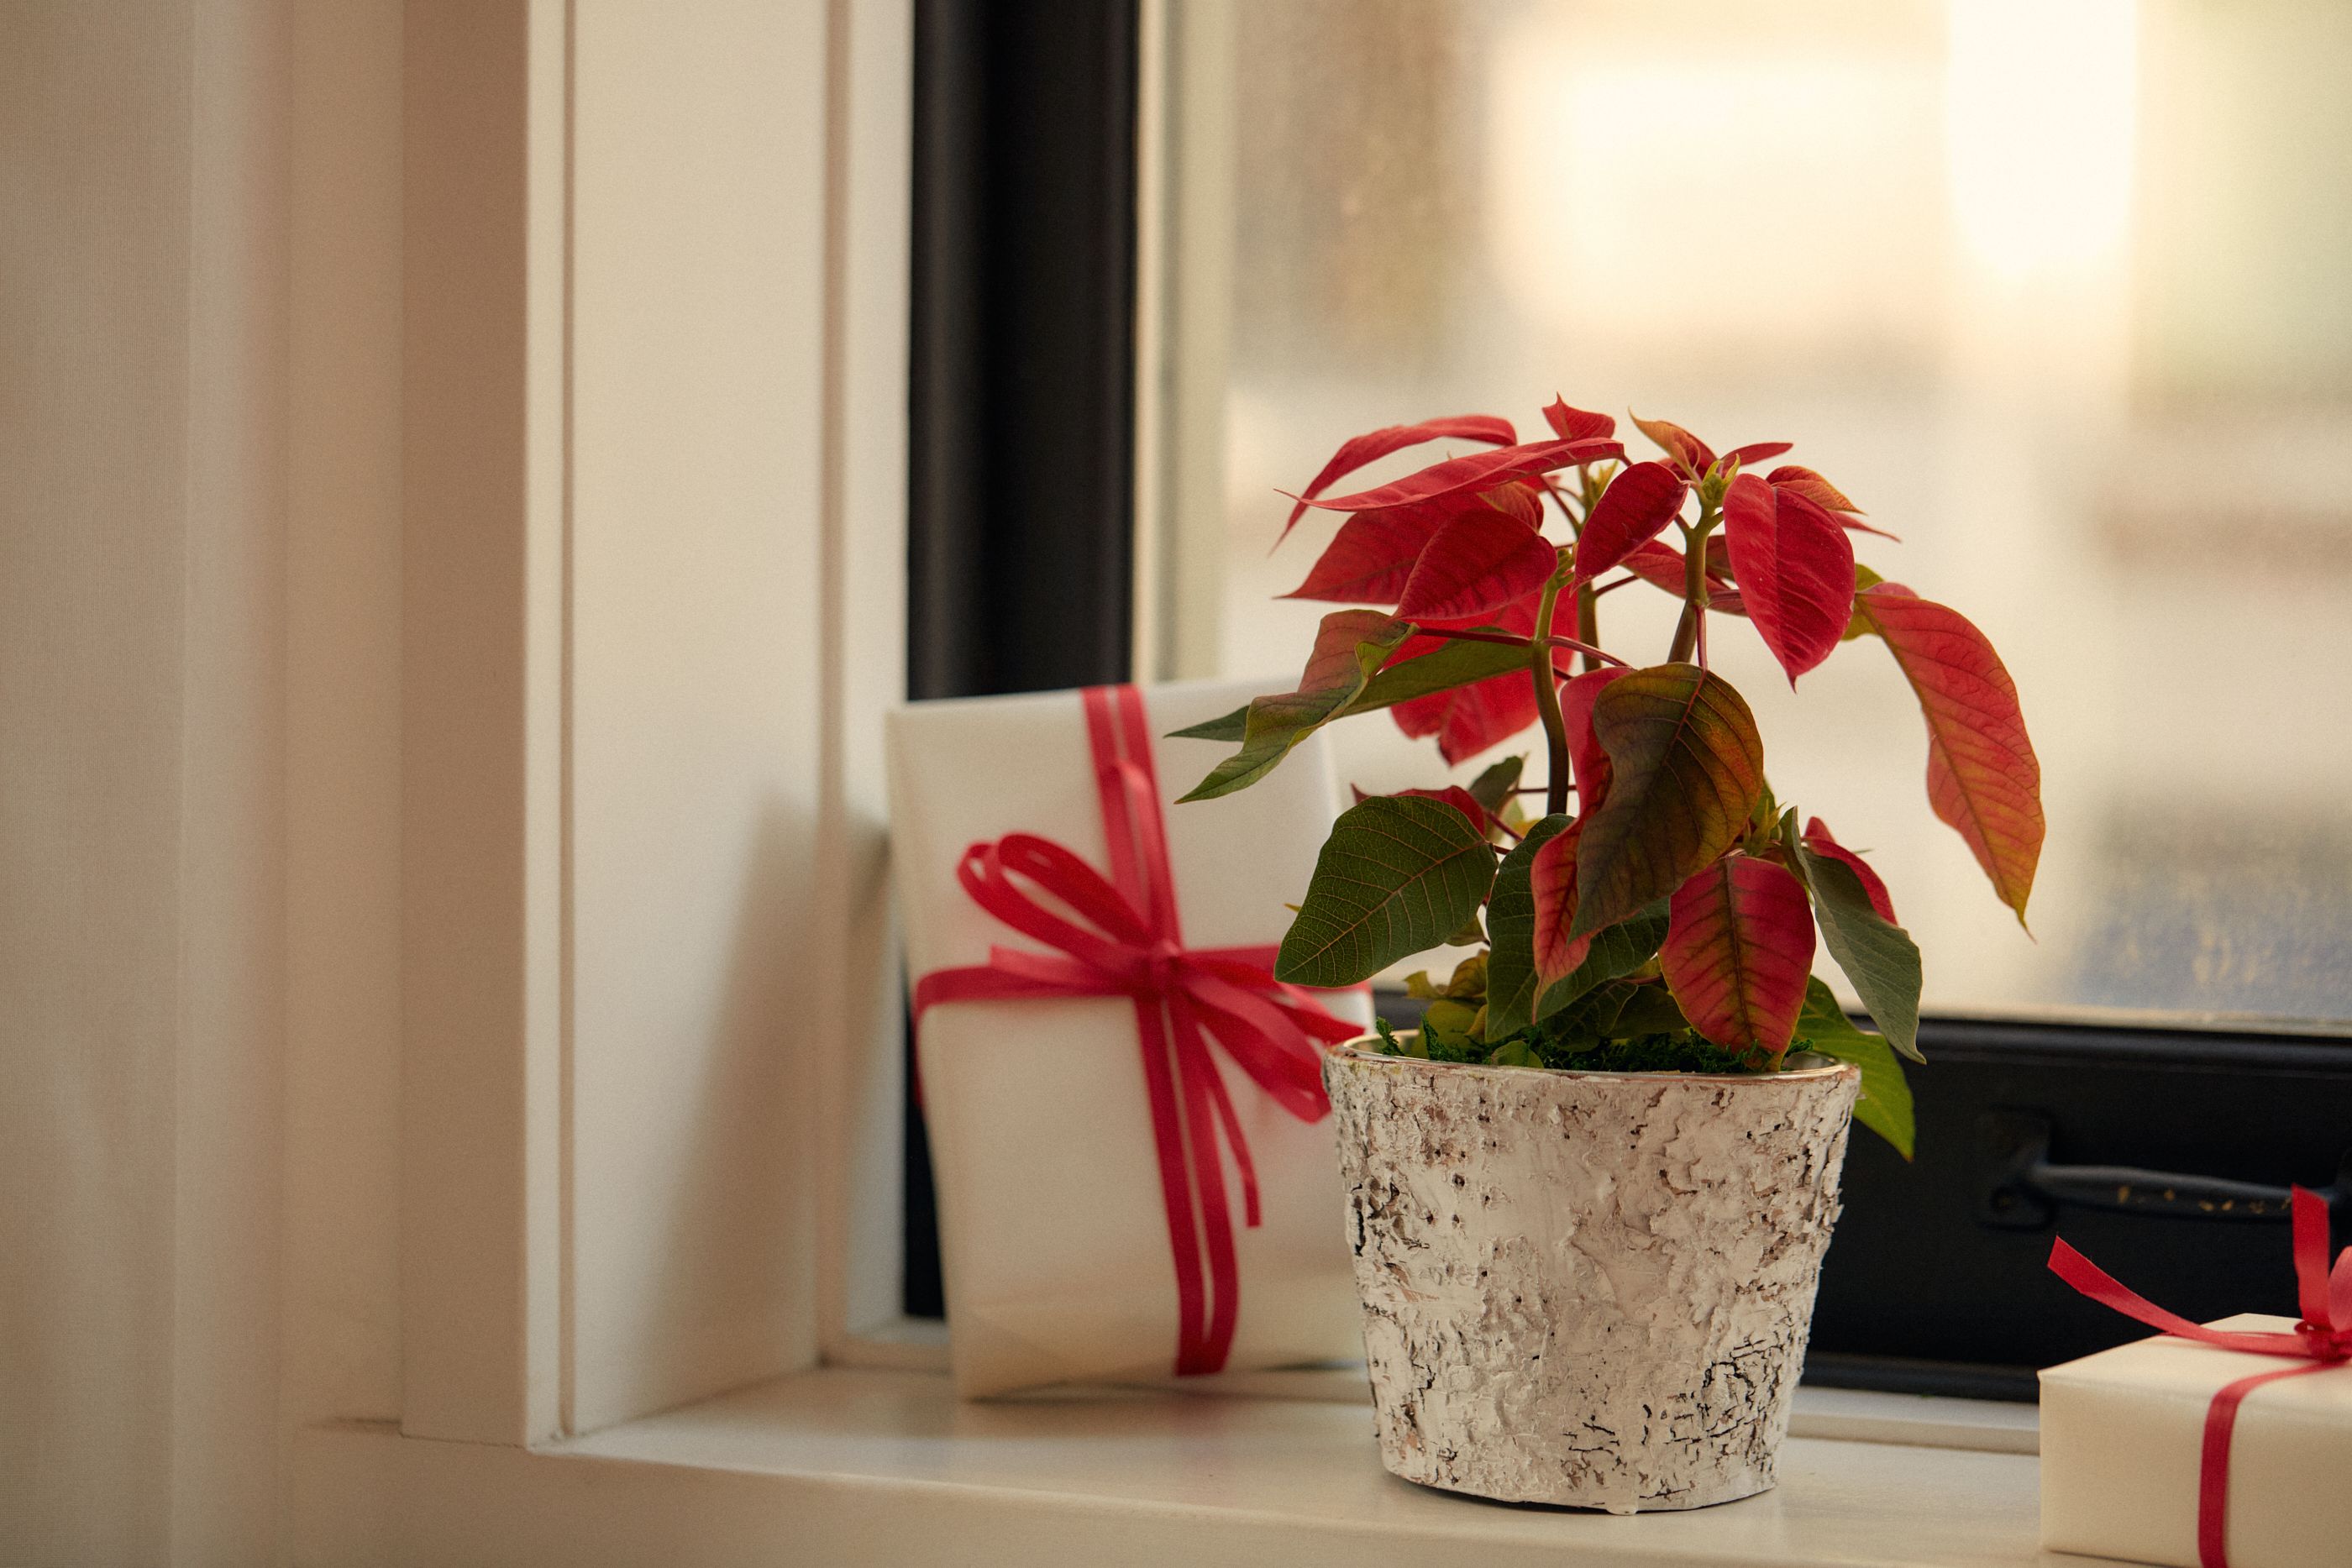 Lifestyle image of a Poinsettia plant and gift with red bow.